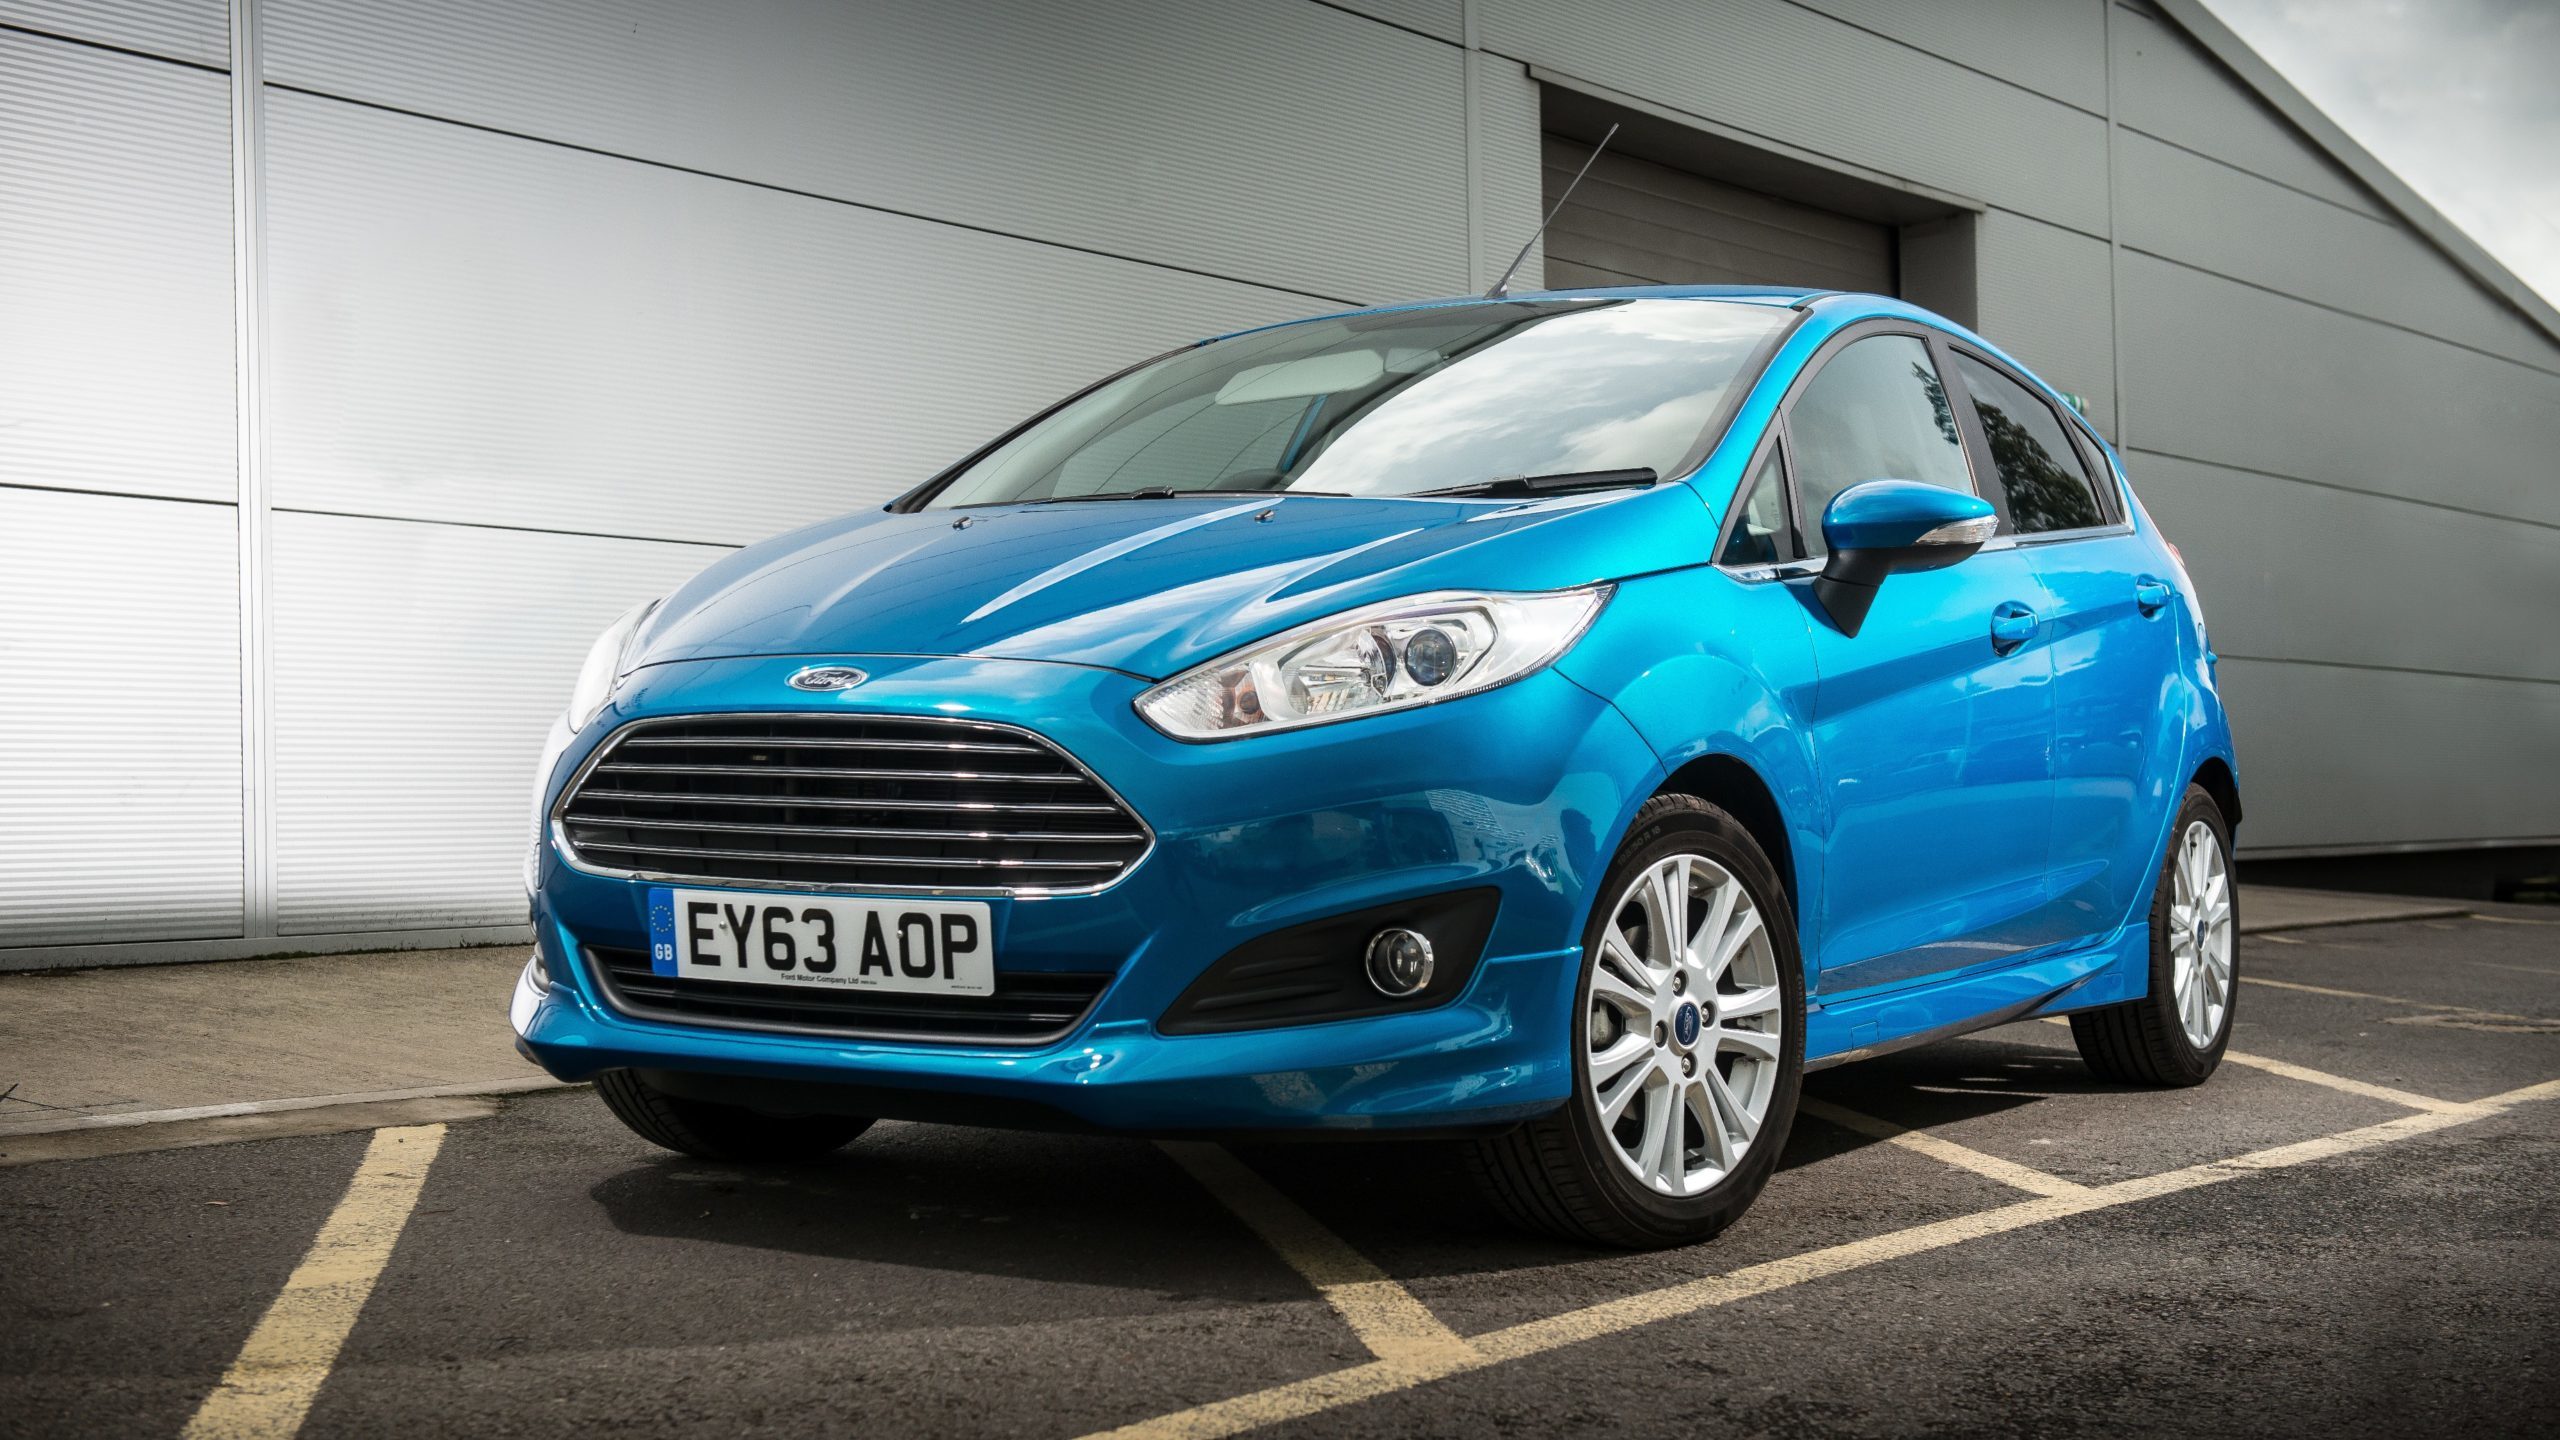 Ford Fiesta (2008-2017) used buying guide